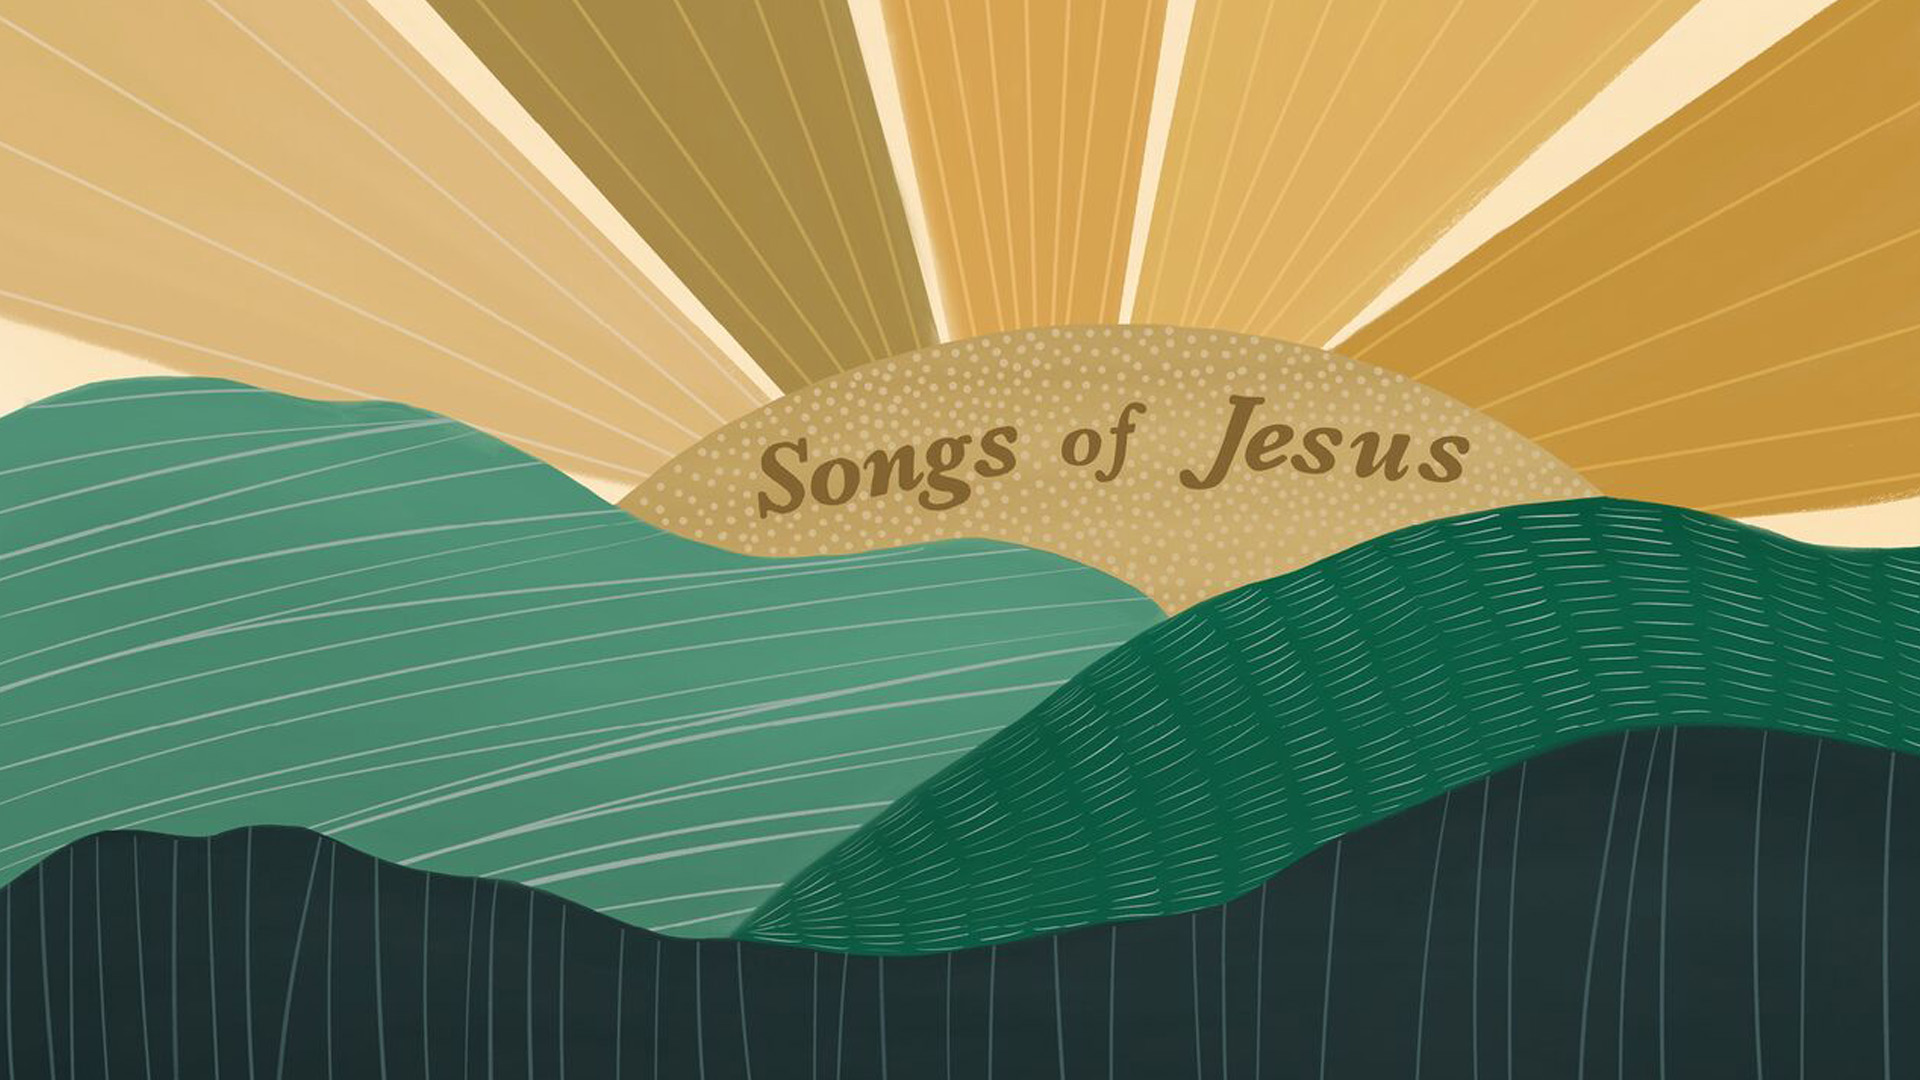 Songs of Jesus graphic